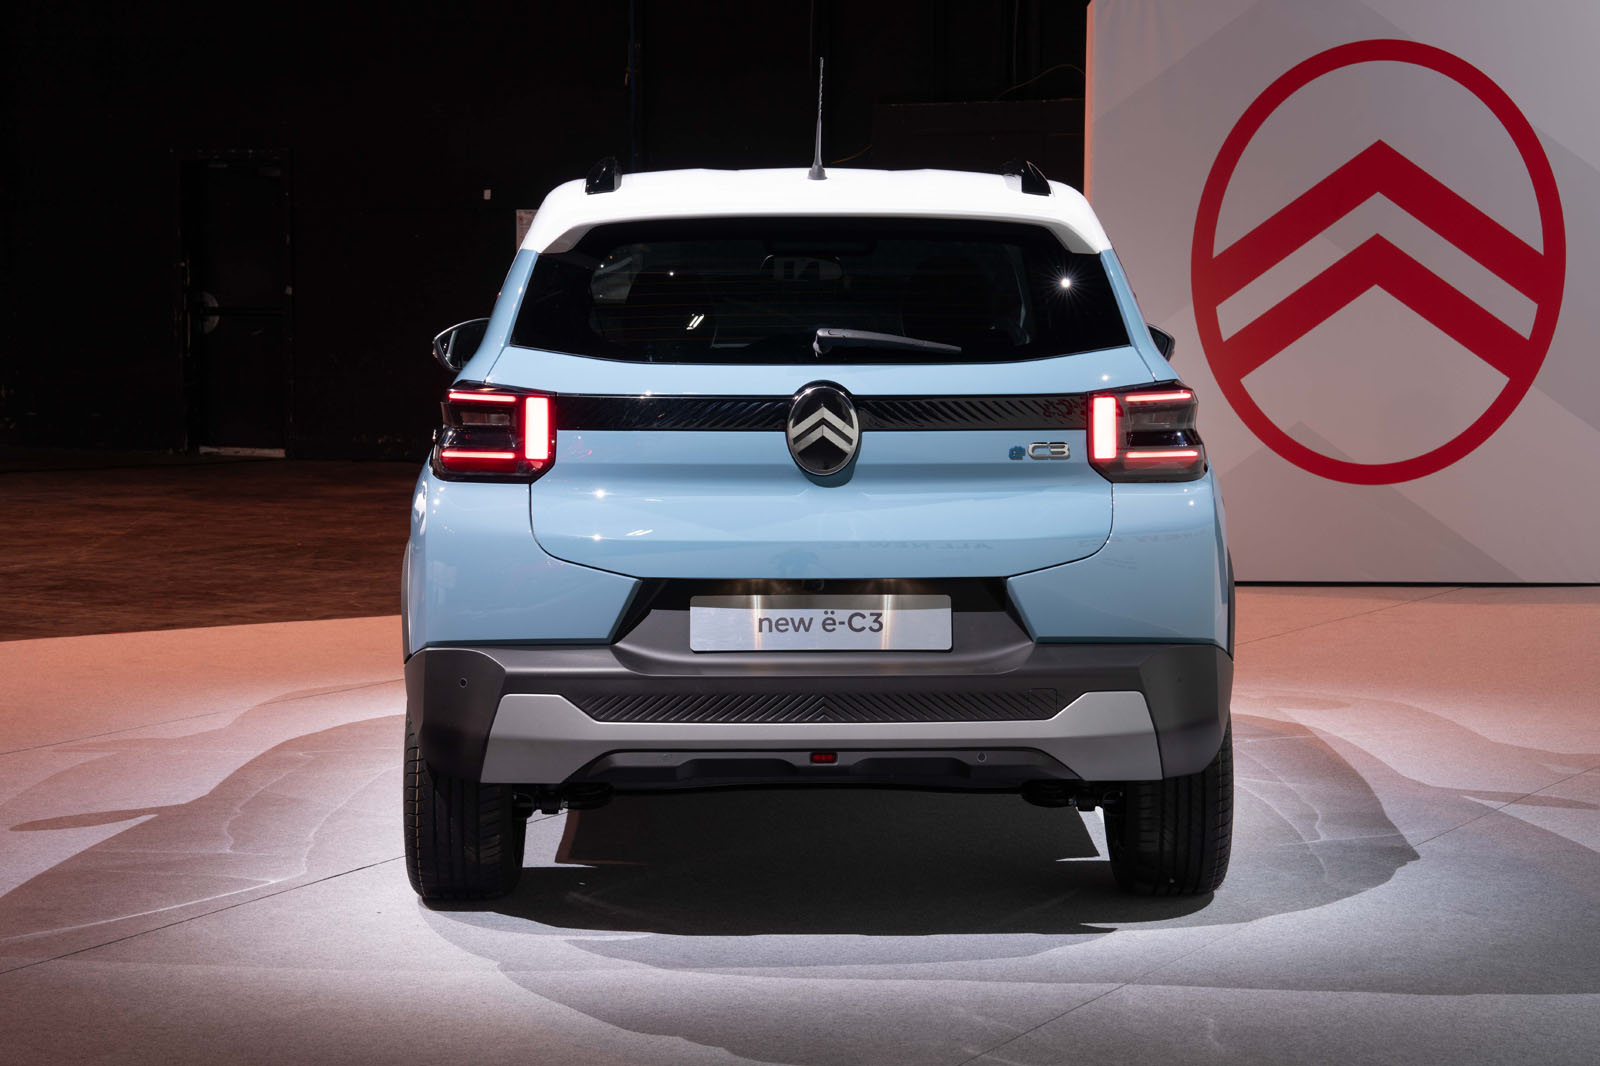 Citroen targets low-cost Chinese EVs with electric C3 for 23,300 euros